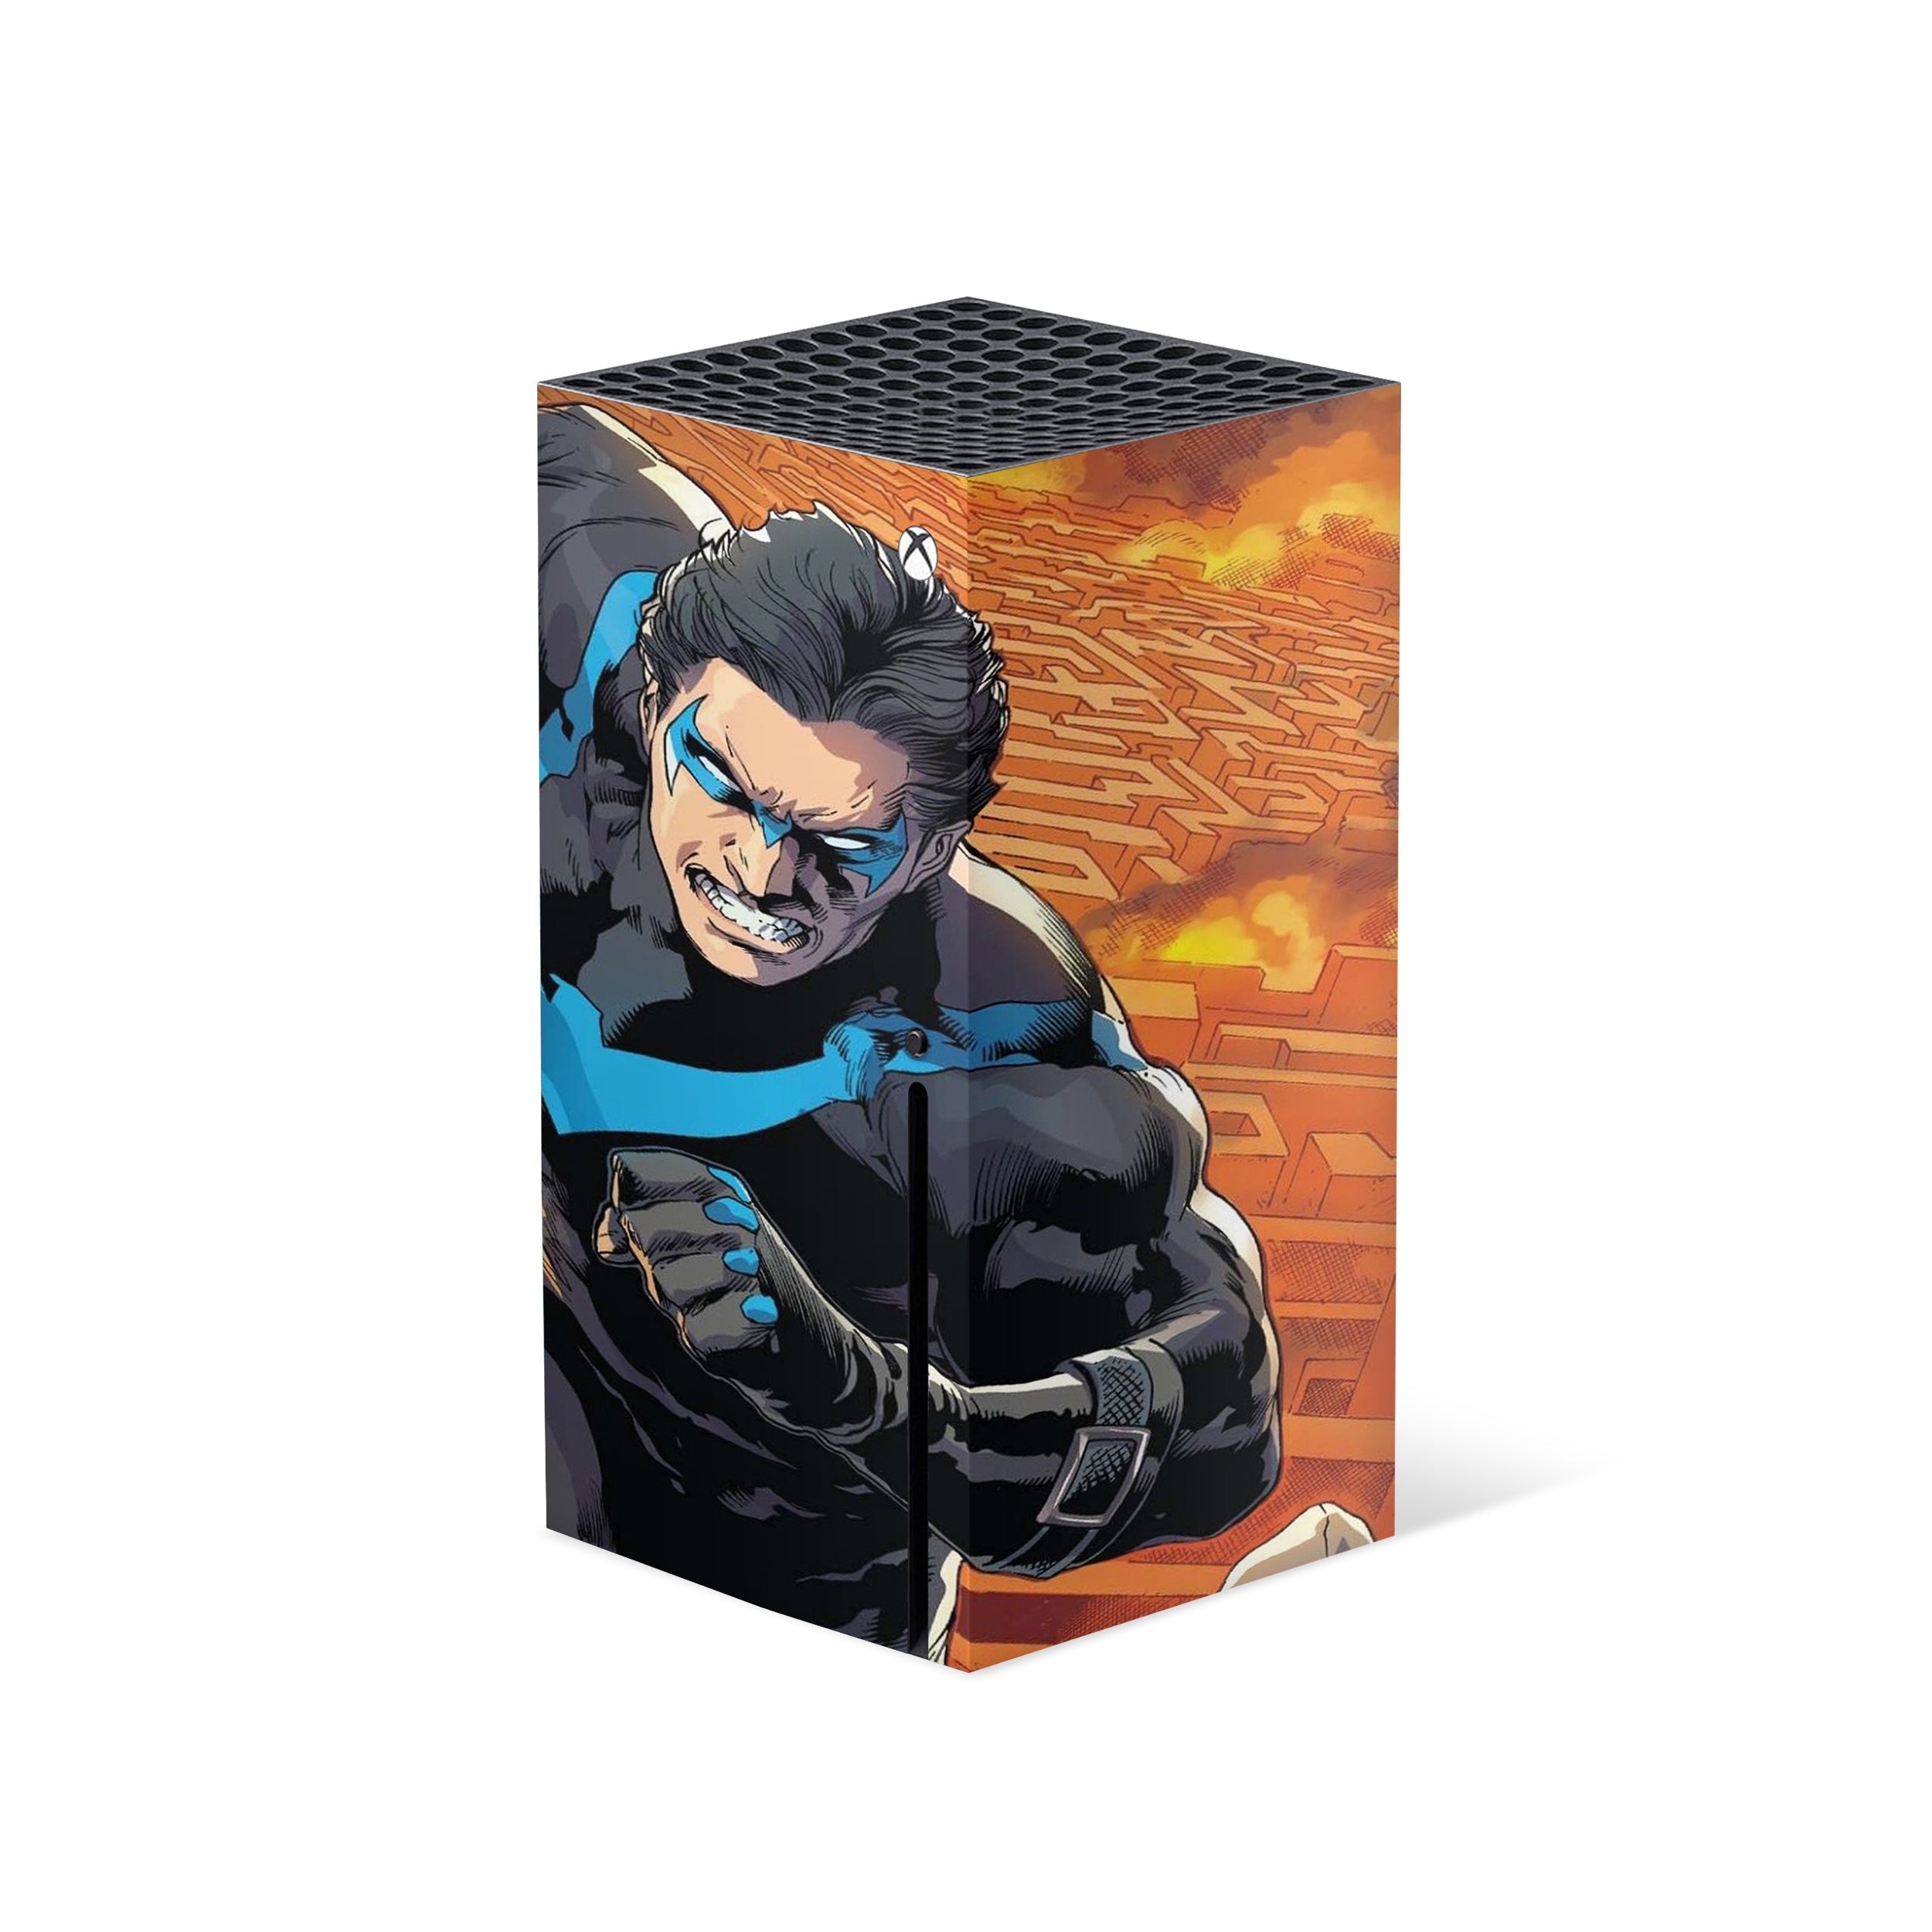 A video game skin featuring a DC Comics Nightwing design for the Xbox Series X.